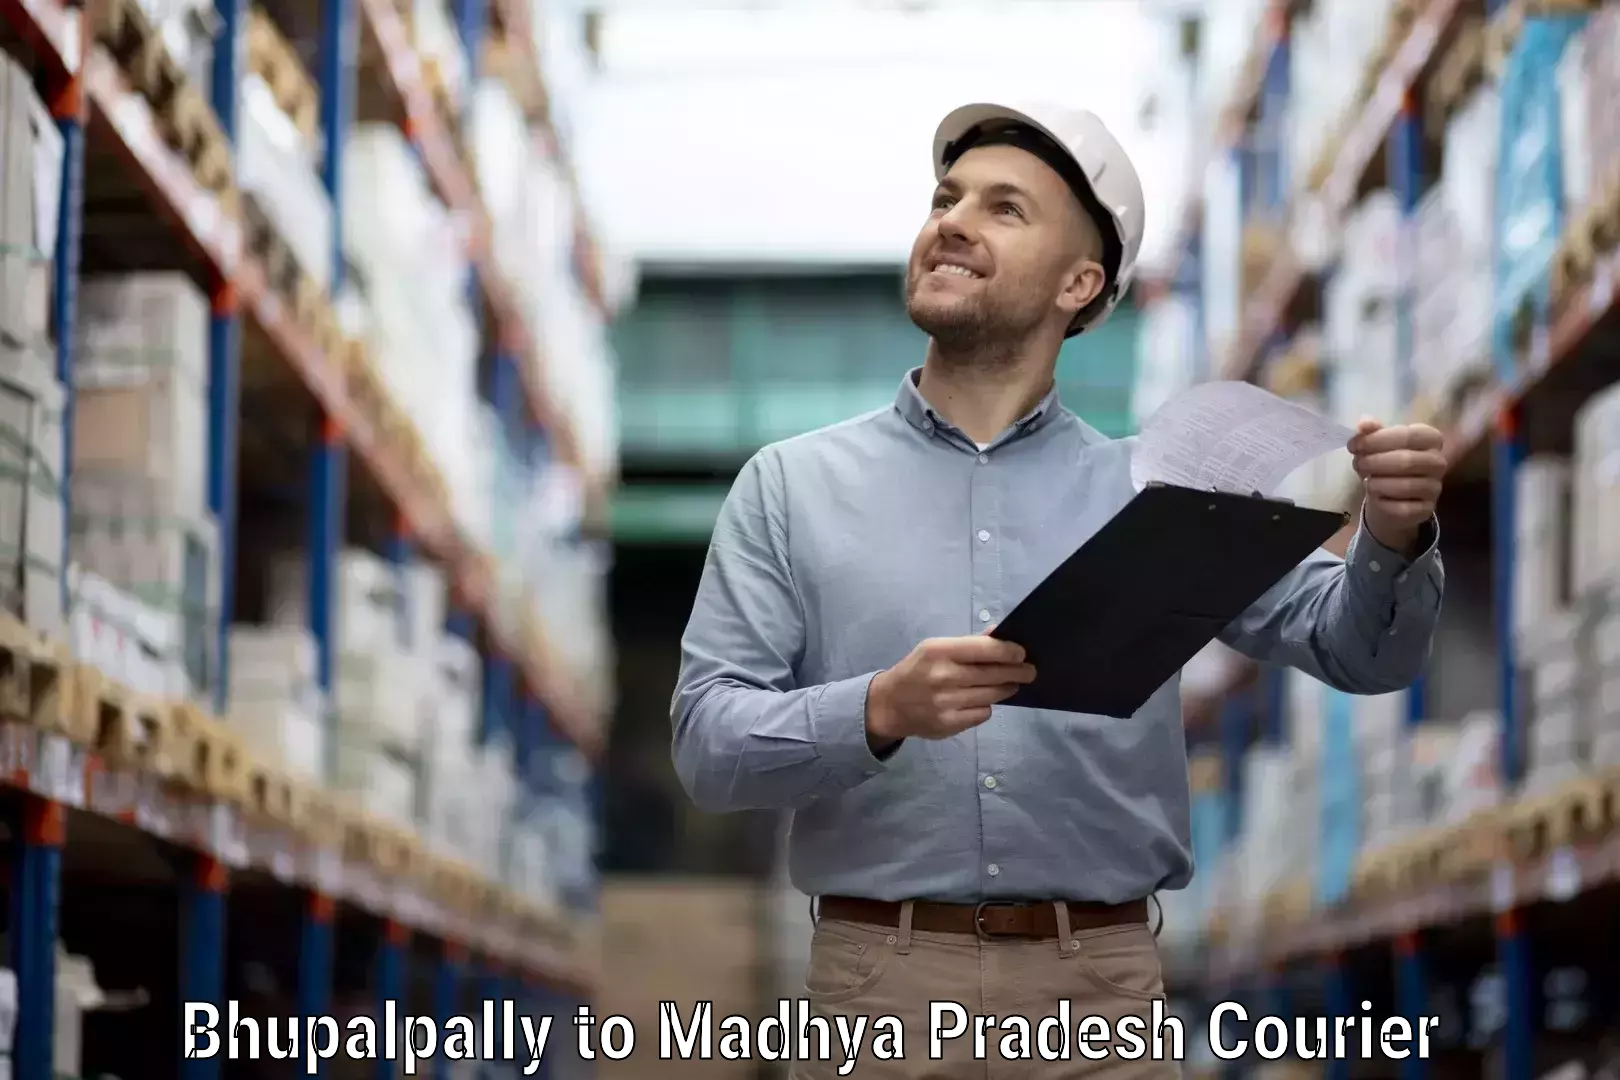 State-of-the-art courier technology Bhupalpally to IIT Indore